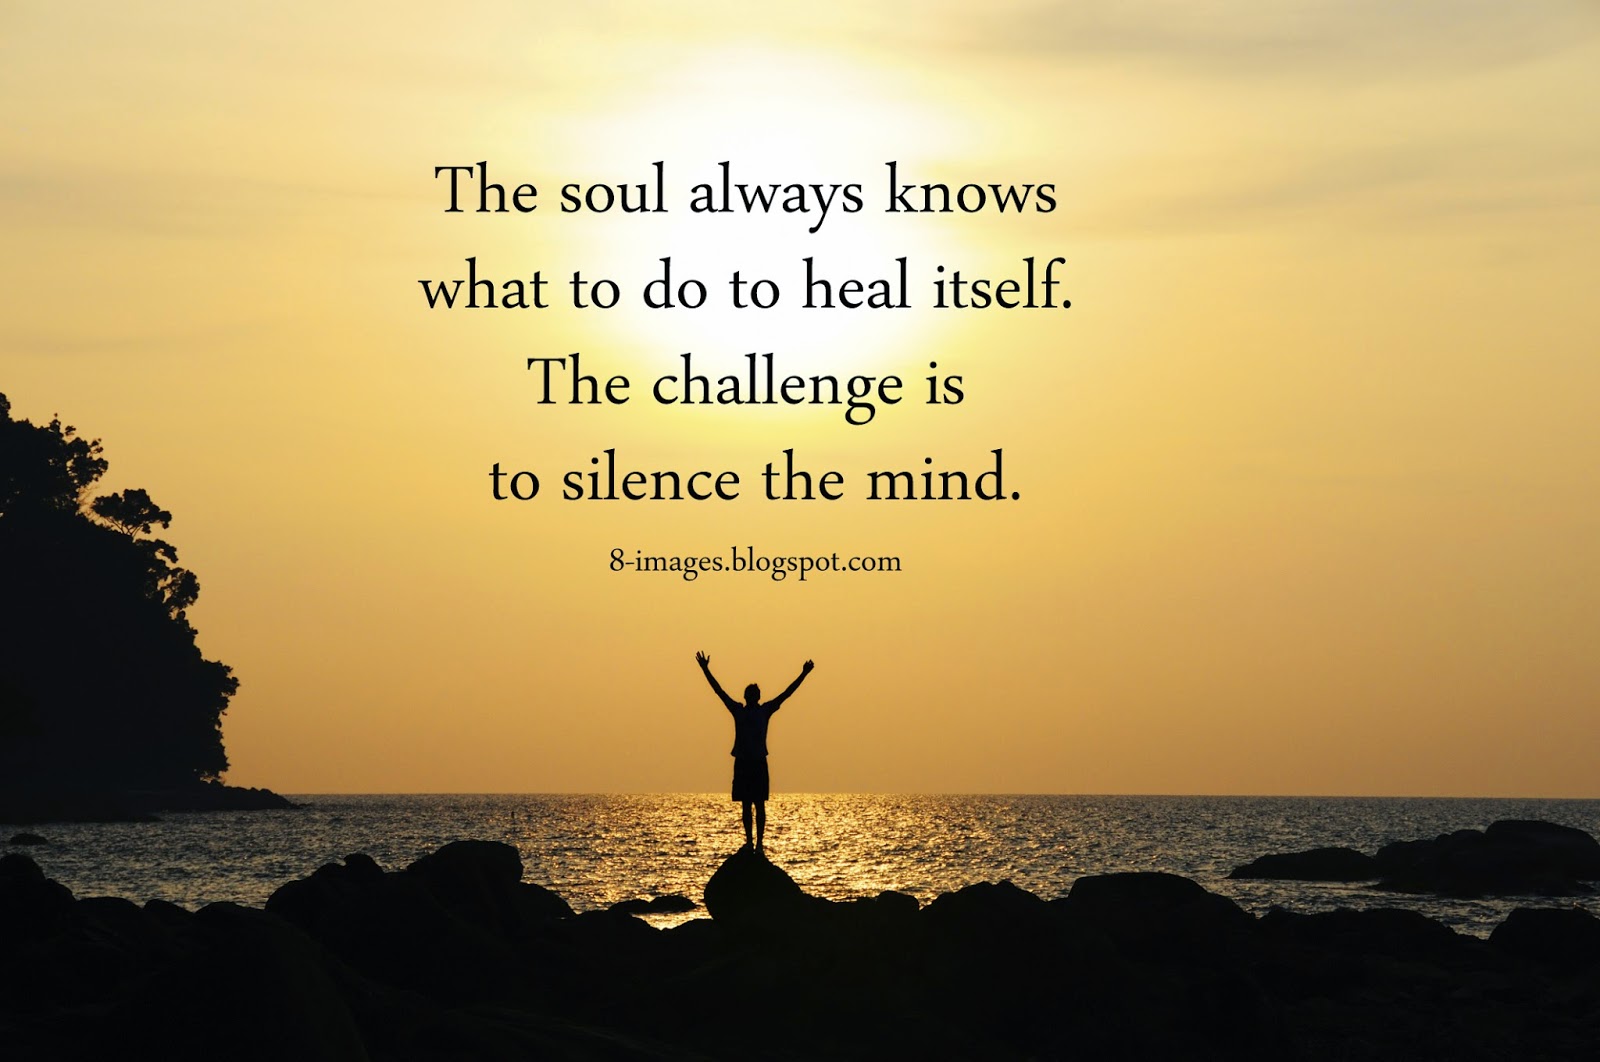 The soul always knows what to do to heal itself. The challenge is to